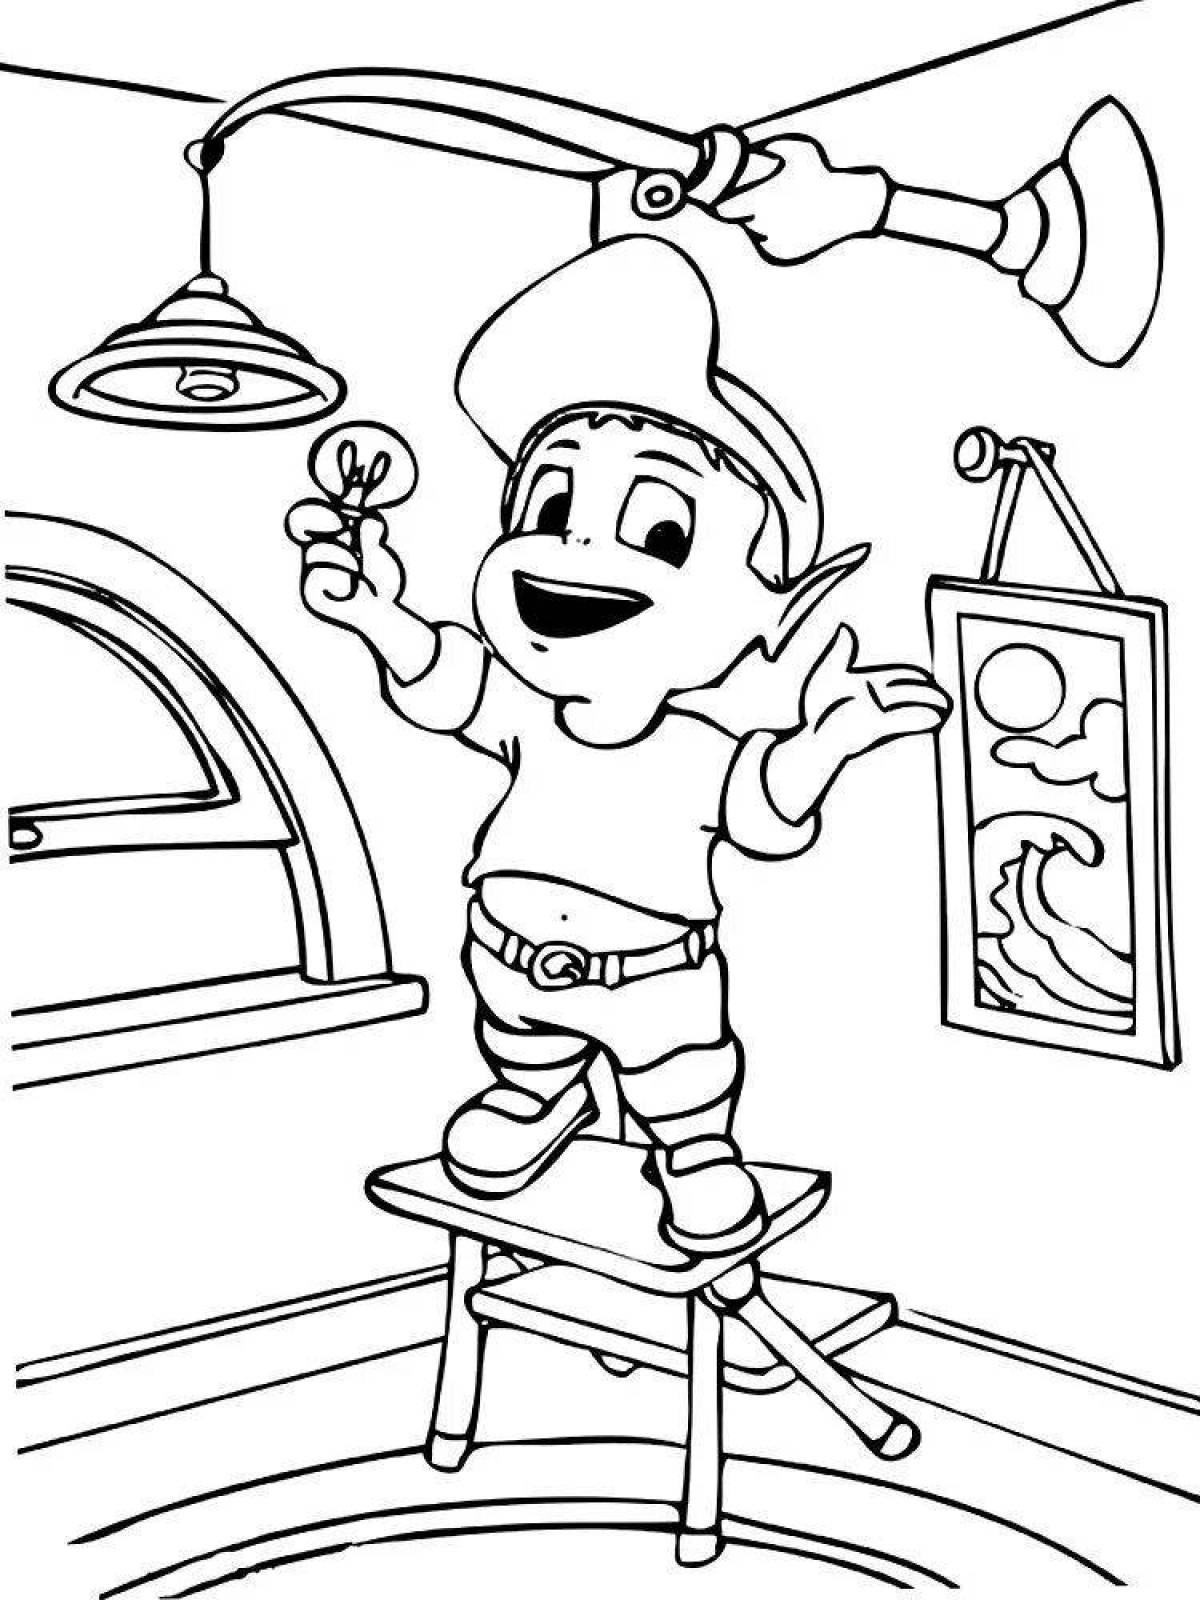 Safety coloring book